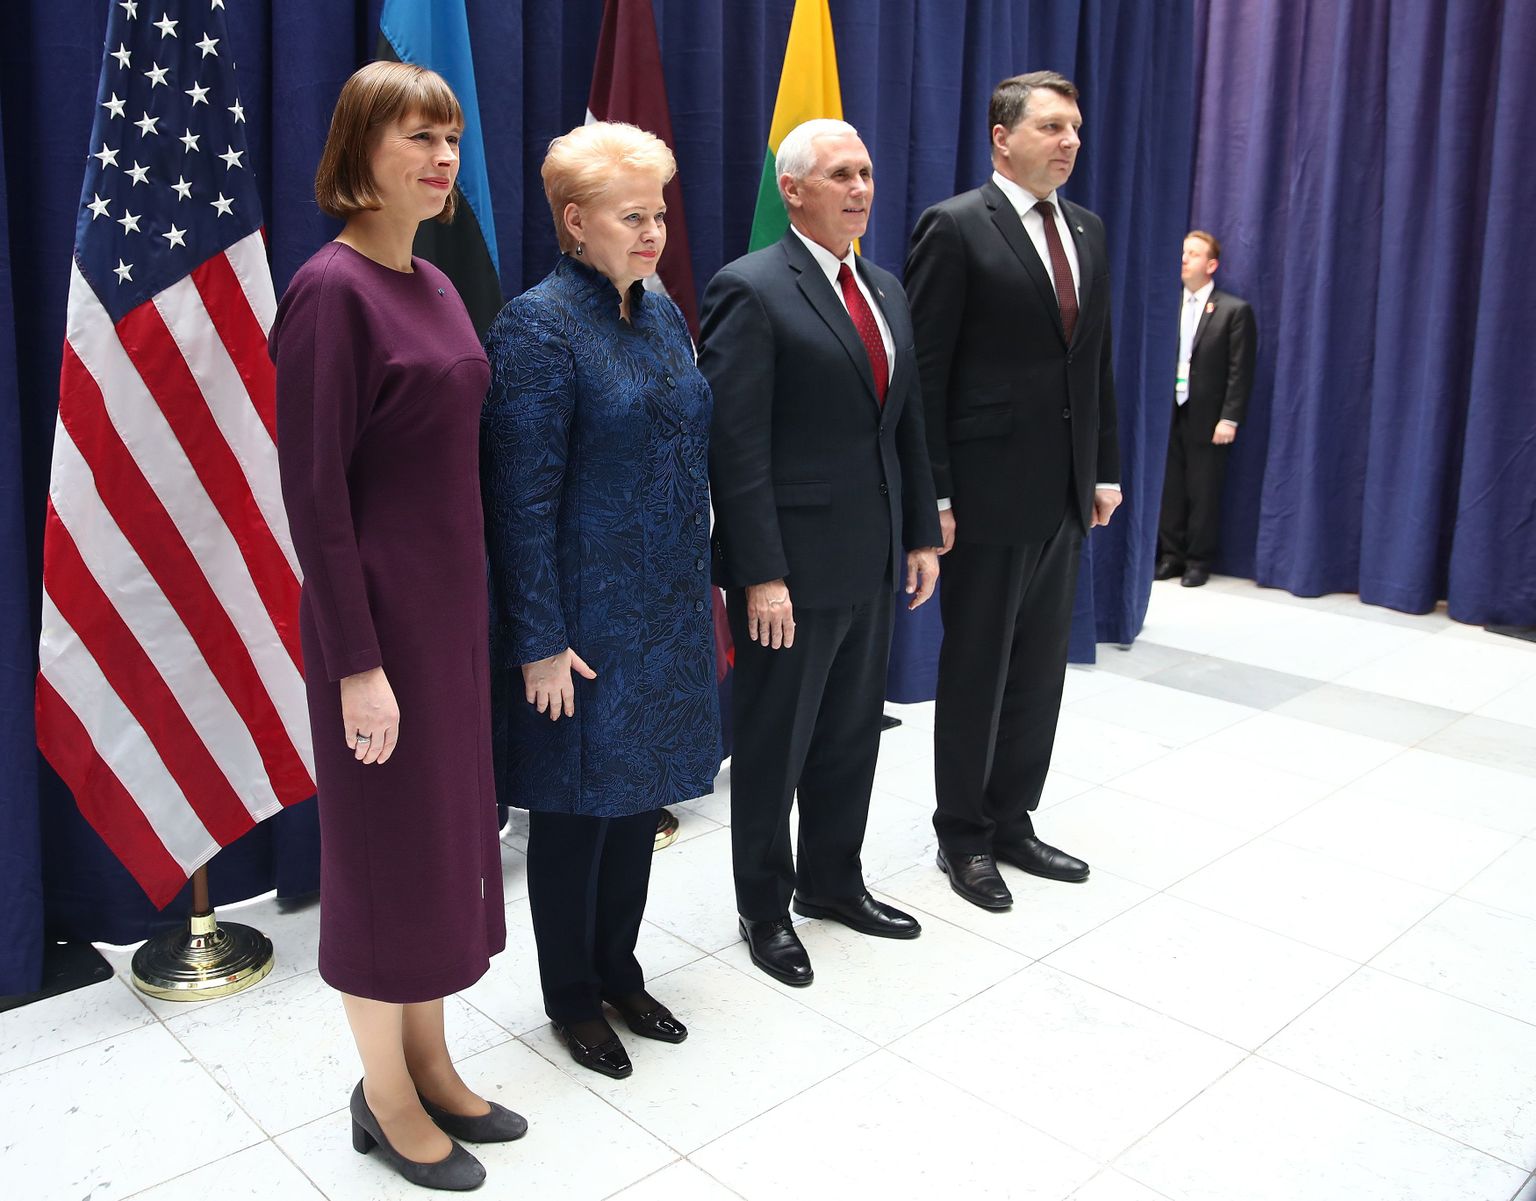 Estonia's President Kersti Kaljulaid, Lithuania's President Dalia Grybauskaite, U.S. Vice President Mike Pence and Latvia's President Raimonds Vejonis pose for a picture before their meeting at the 53rd Munich Security Conference in Munich, Germany, February 18, 2017.   REUTERS/Michael Dalder